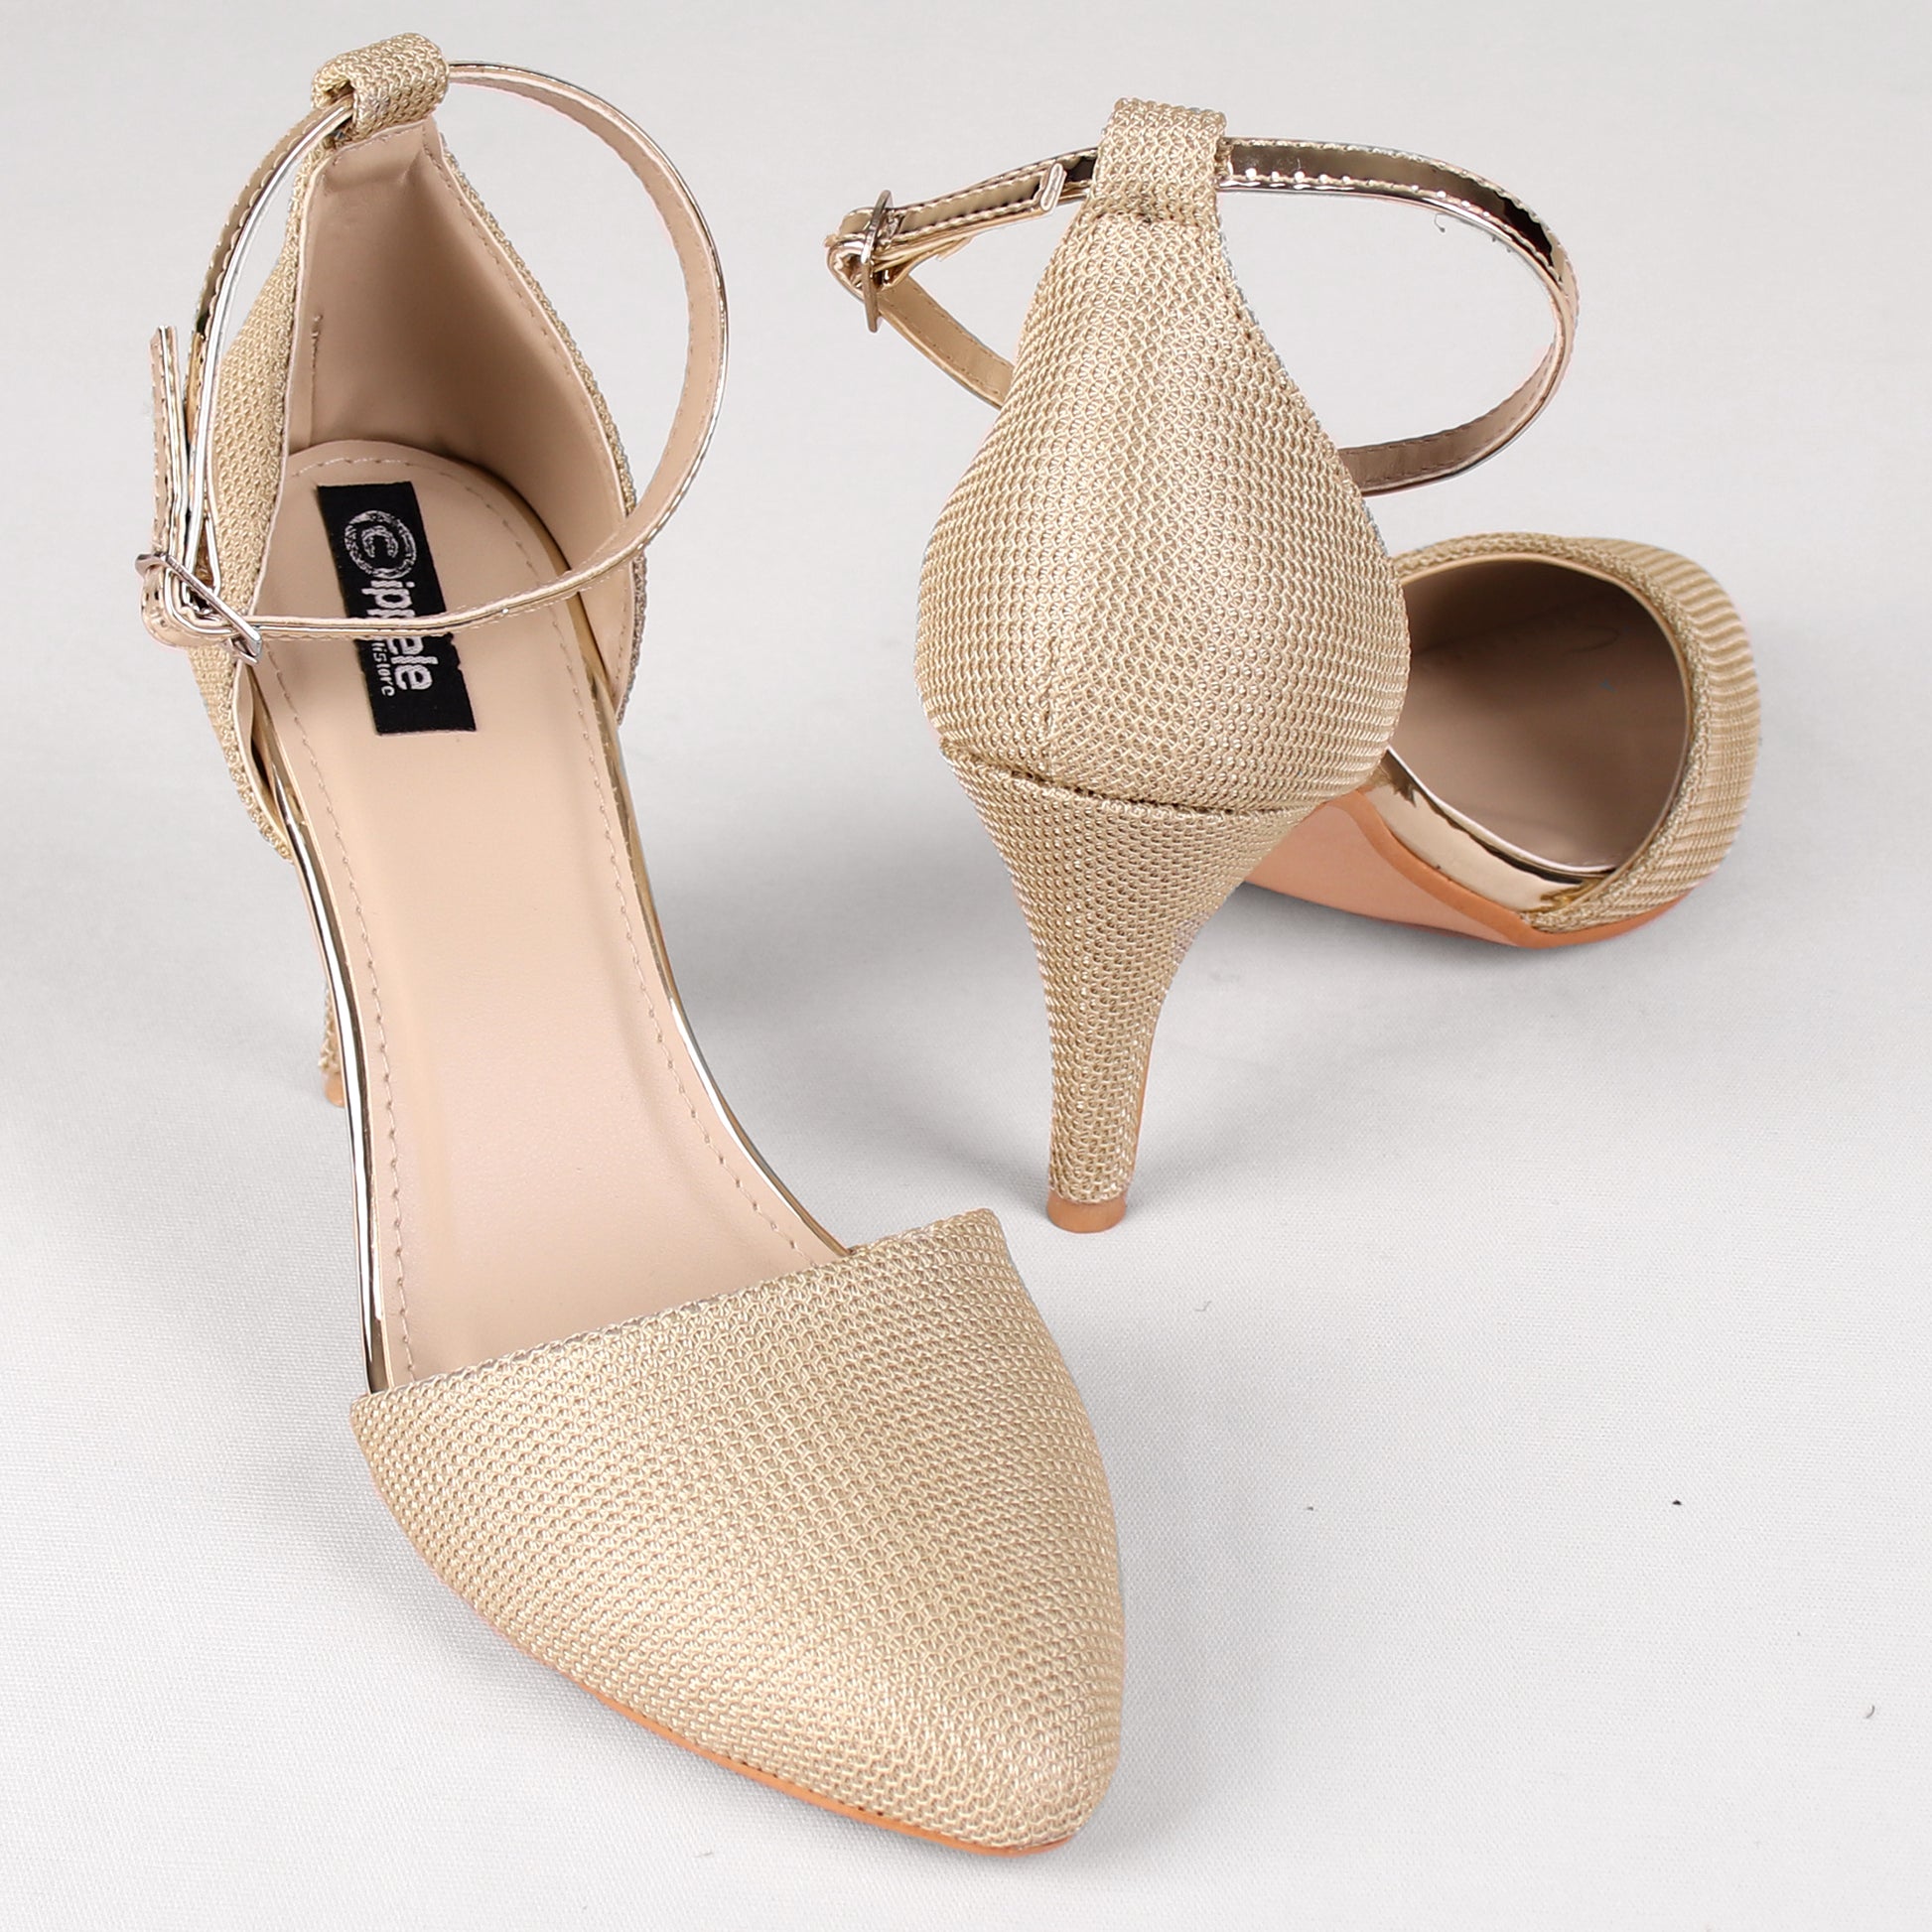 Foot Wear,The Quirky soft Sand Paper Heel in Pista Green - Cippele Multi Store